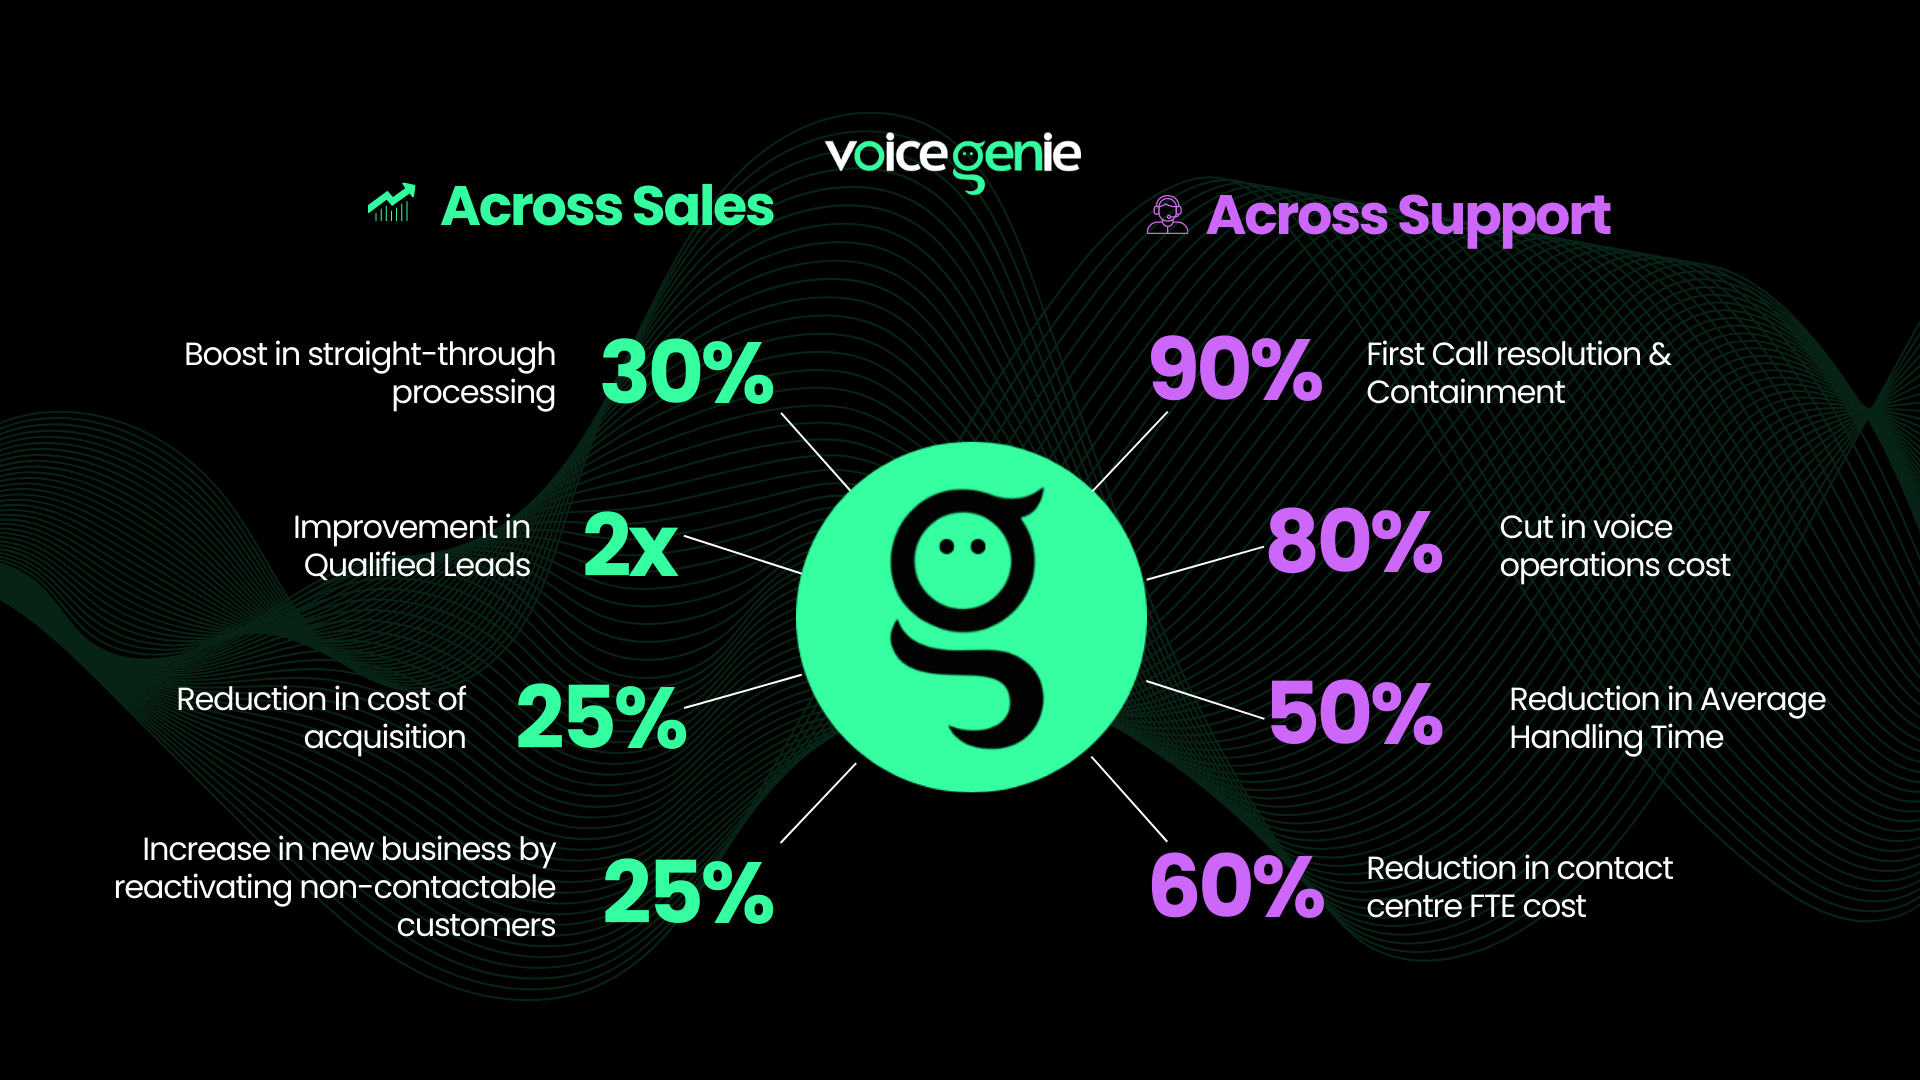 Image showing VoiceGenie's success demographics across sales and support